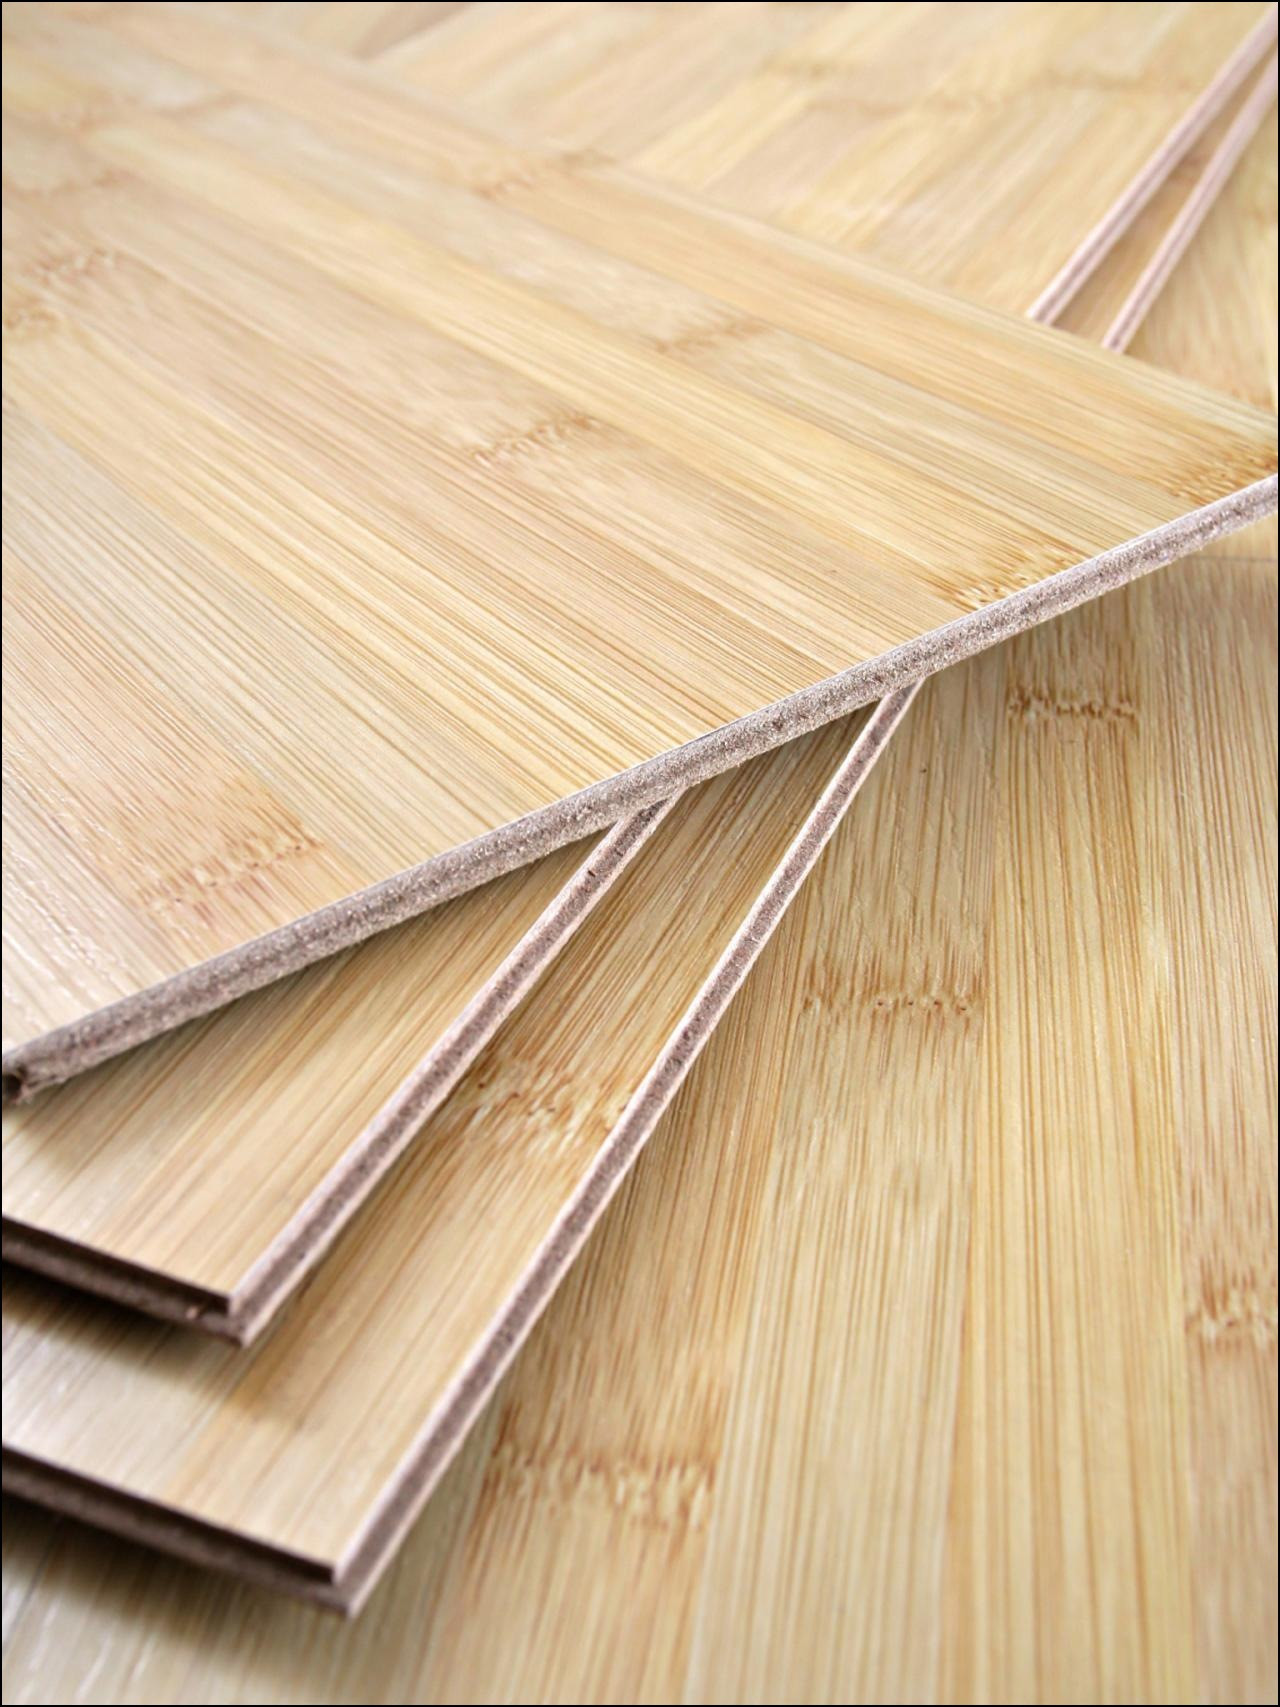 27 Unique Hardwood Floor Installation Cost Los Angeles 2024 free download hardwood floor installation cost los angeles of home depot queen creek flooring ideas with home depot solid bamboo flooring images hardwood floor design wood flooring cost strand bamboo floo